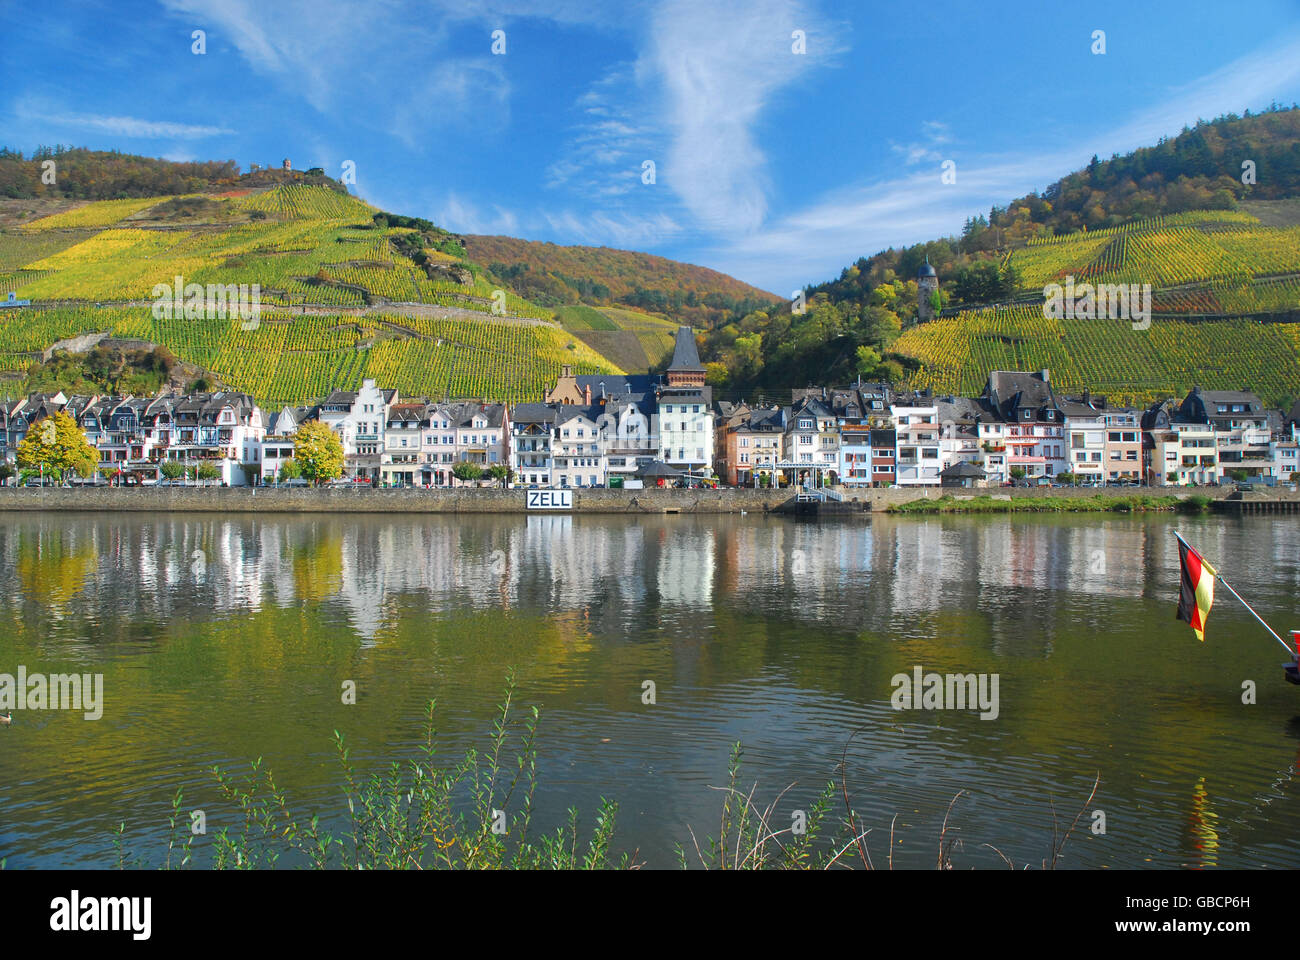 Zell germany hi-res stock photography and images - Alamy